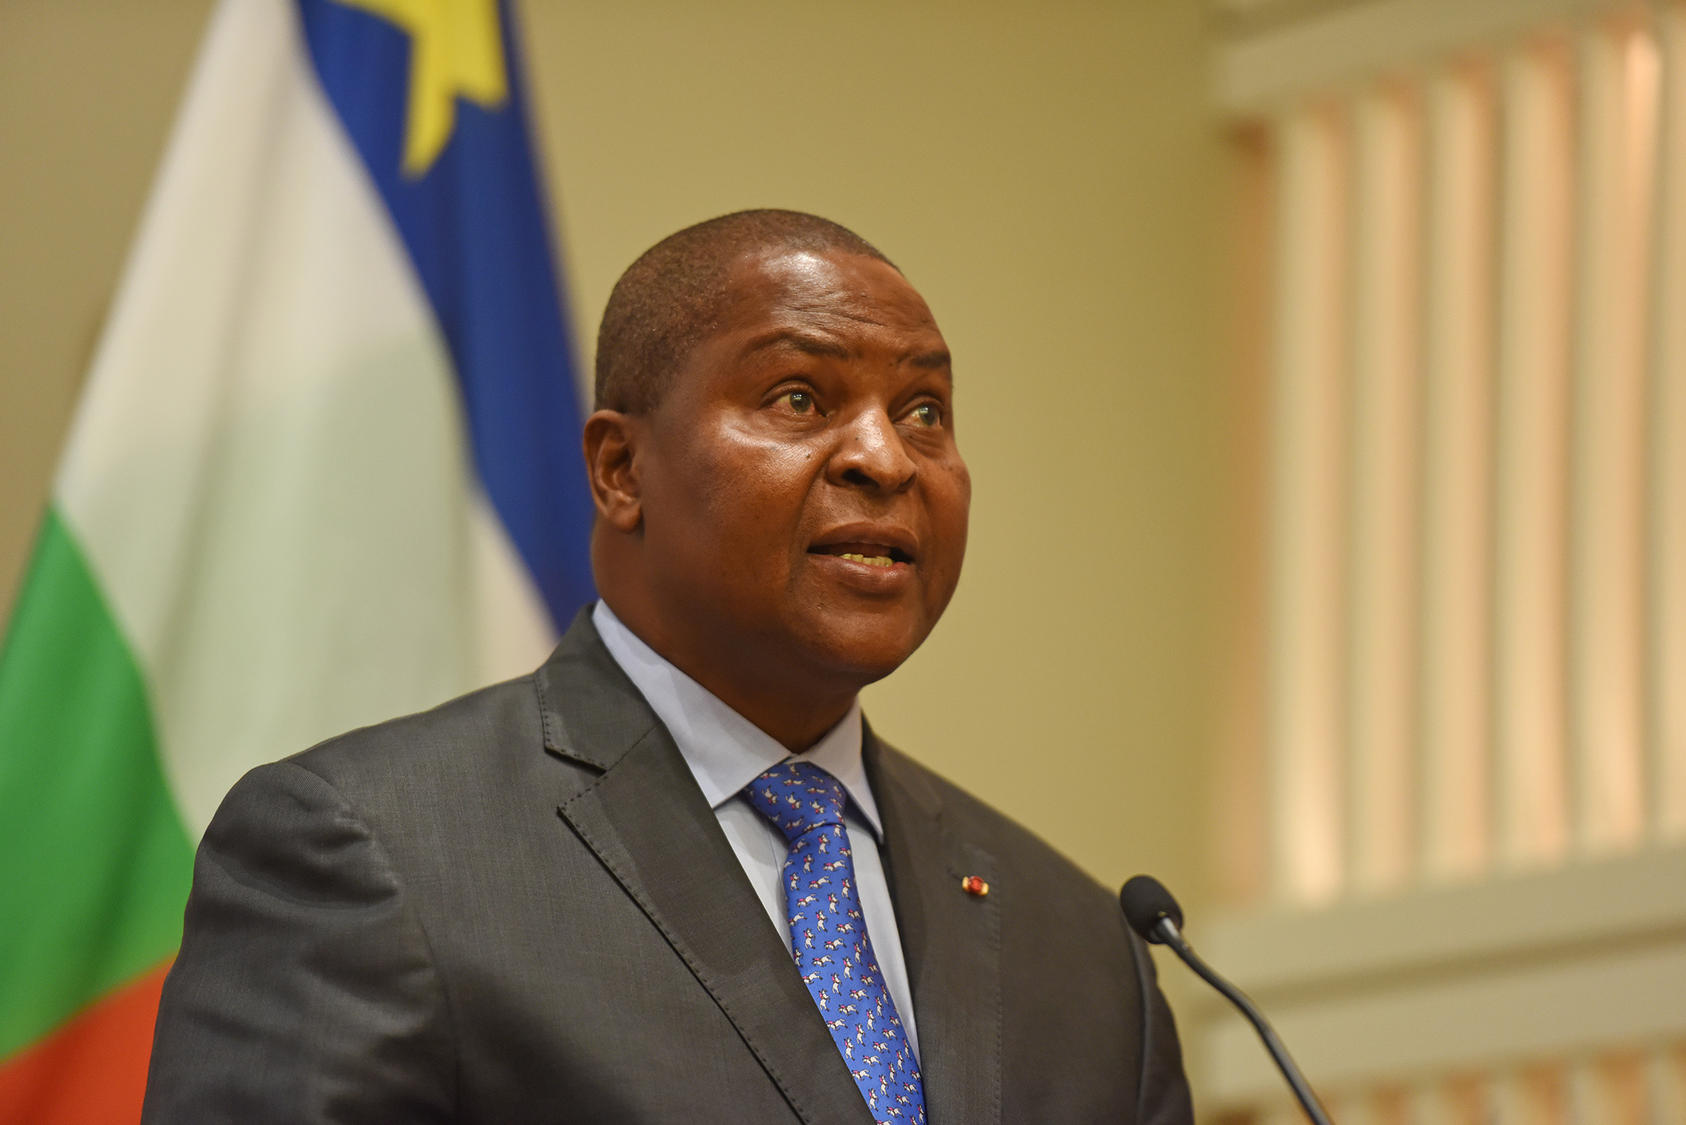 Central African Republic's President Faustin-Archange Touadéra (photo credit: The United States Institute of Peace)